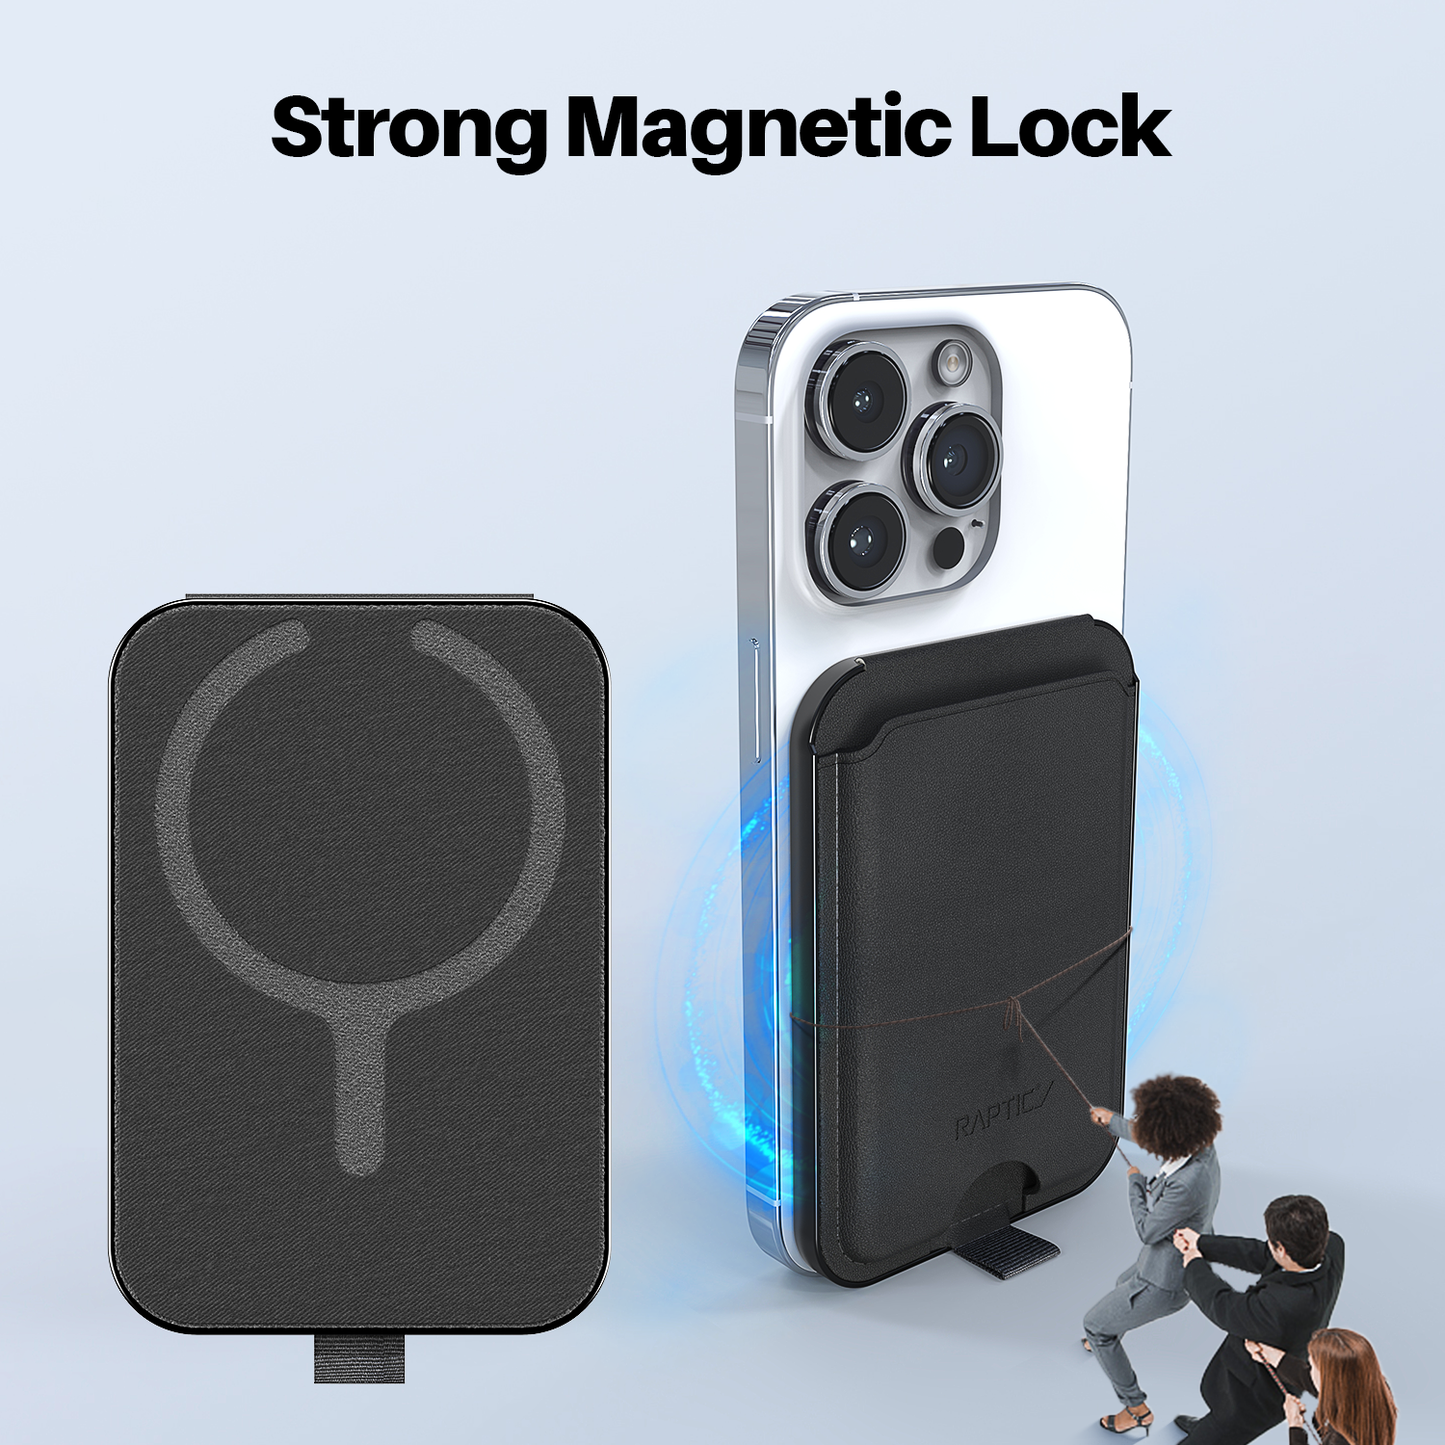 Strong magnetic lock for iPhone 11, Raptic MagSafe.